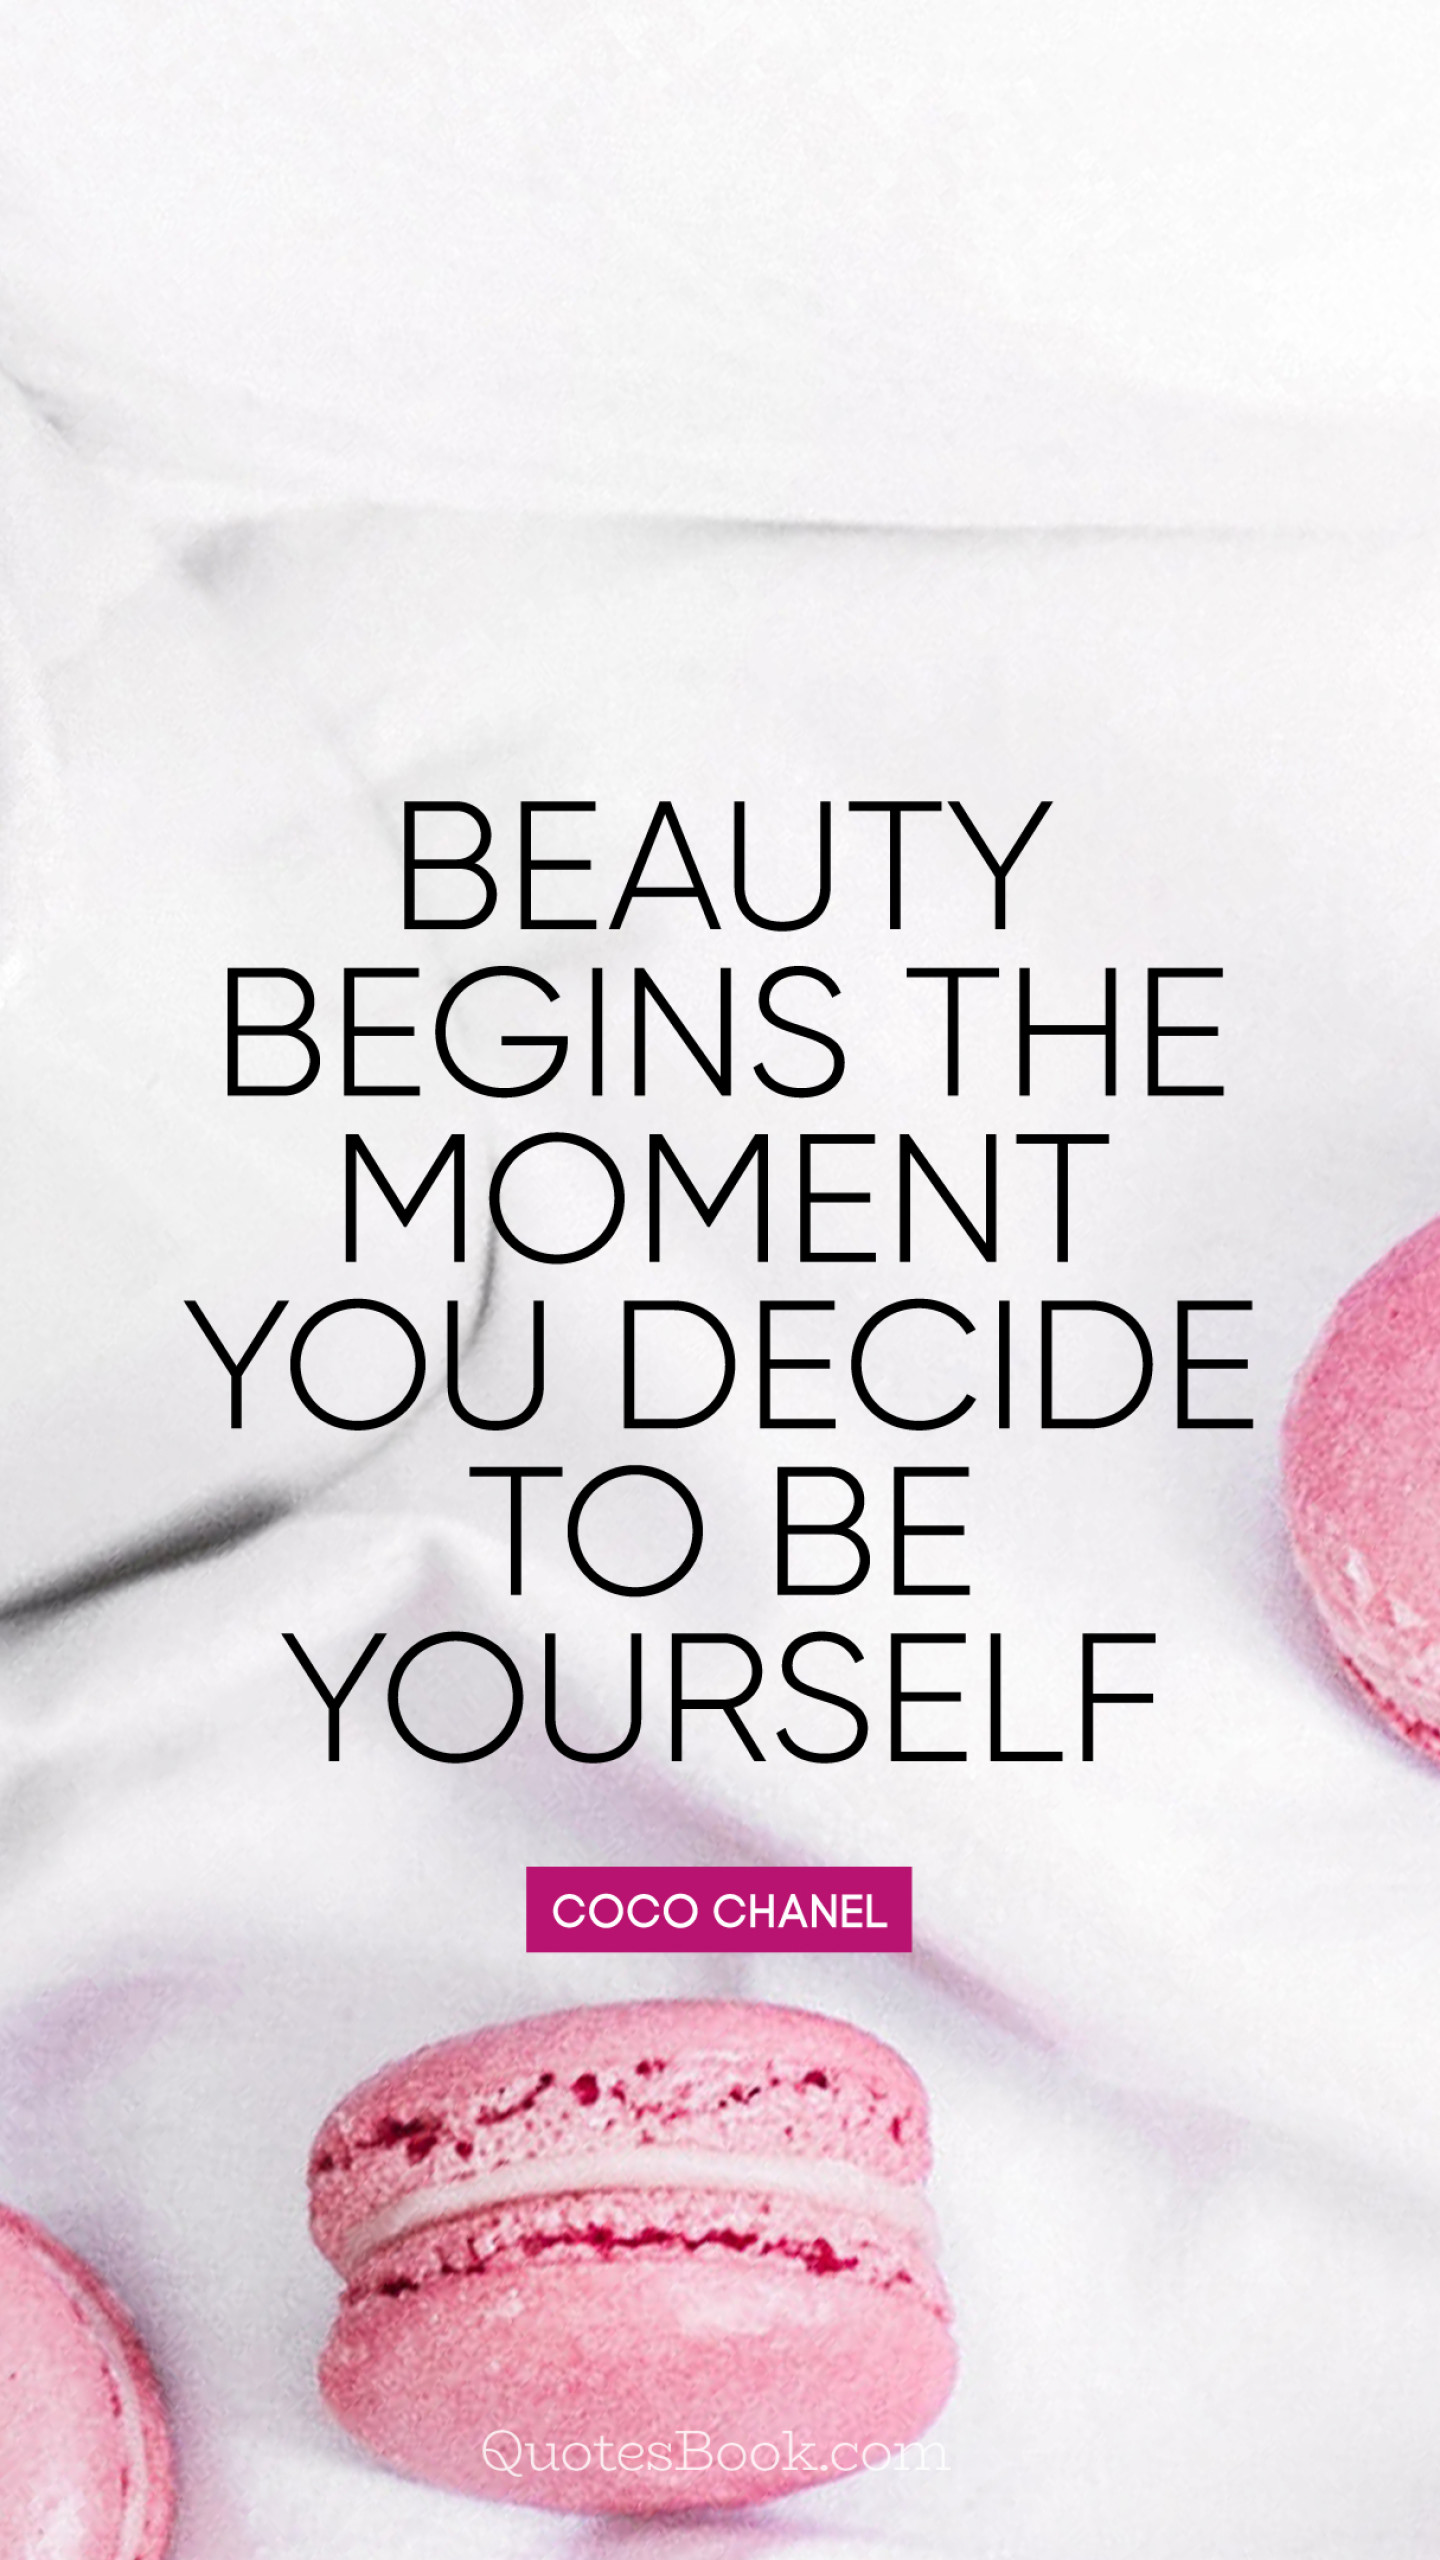 Beauty begins the moment you decide to be yourself  Quote by Coco Chanel   QuotesBook